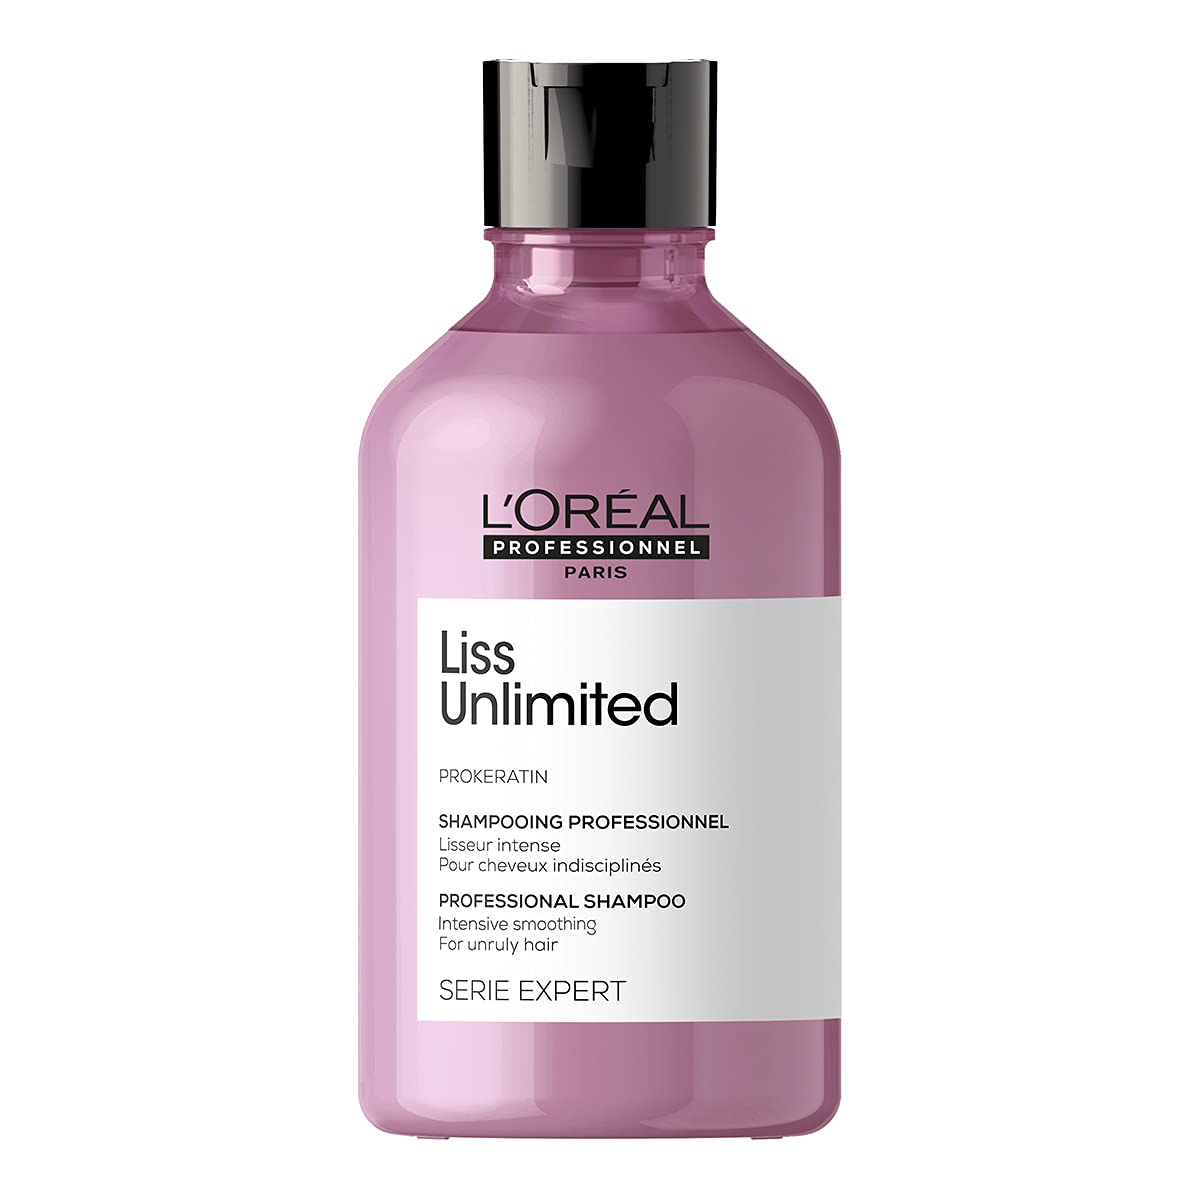 LOreal Professionnel Liss Unlimited Shampoo With Pro-Keratin And Kukui Nut Oil